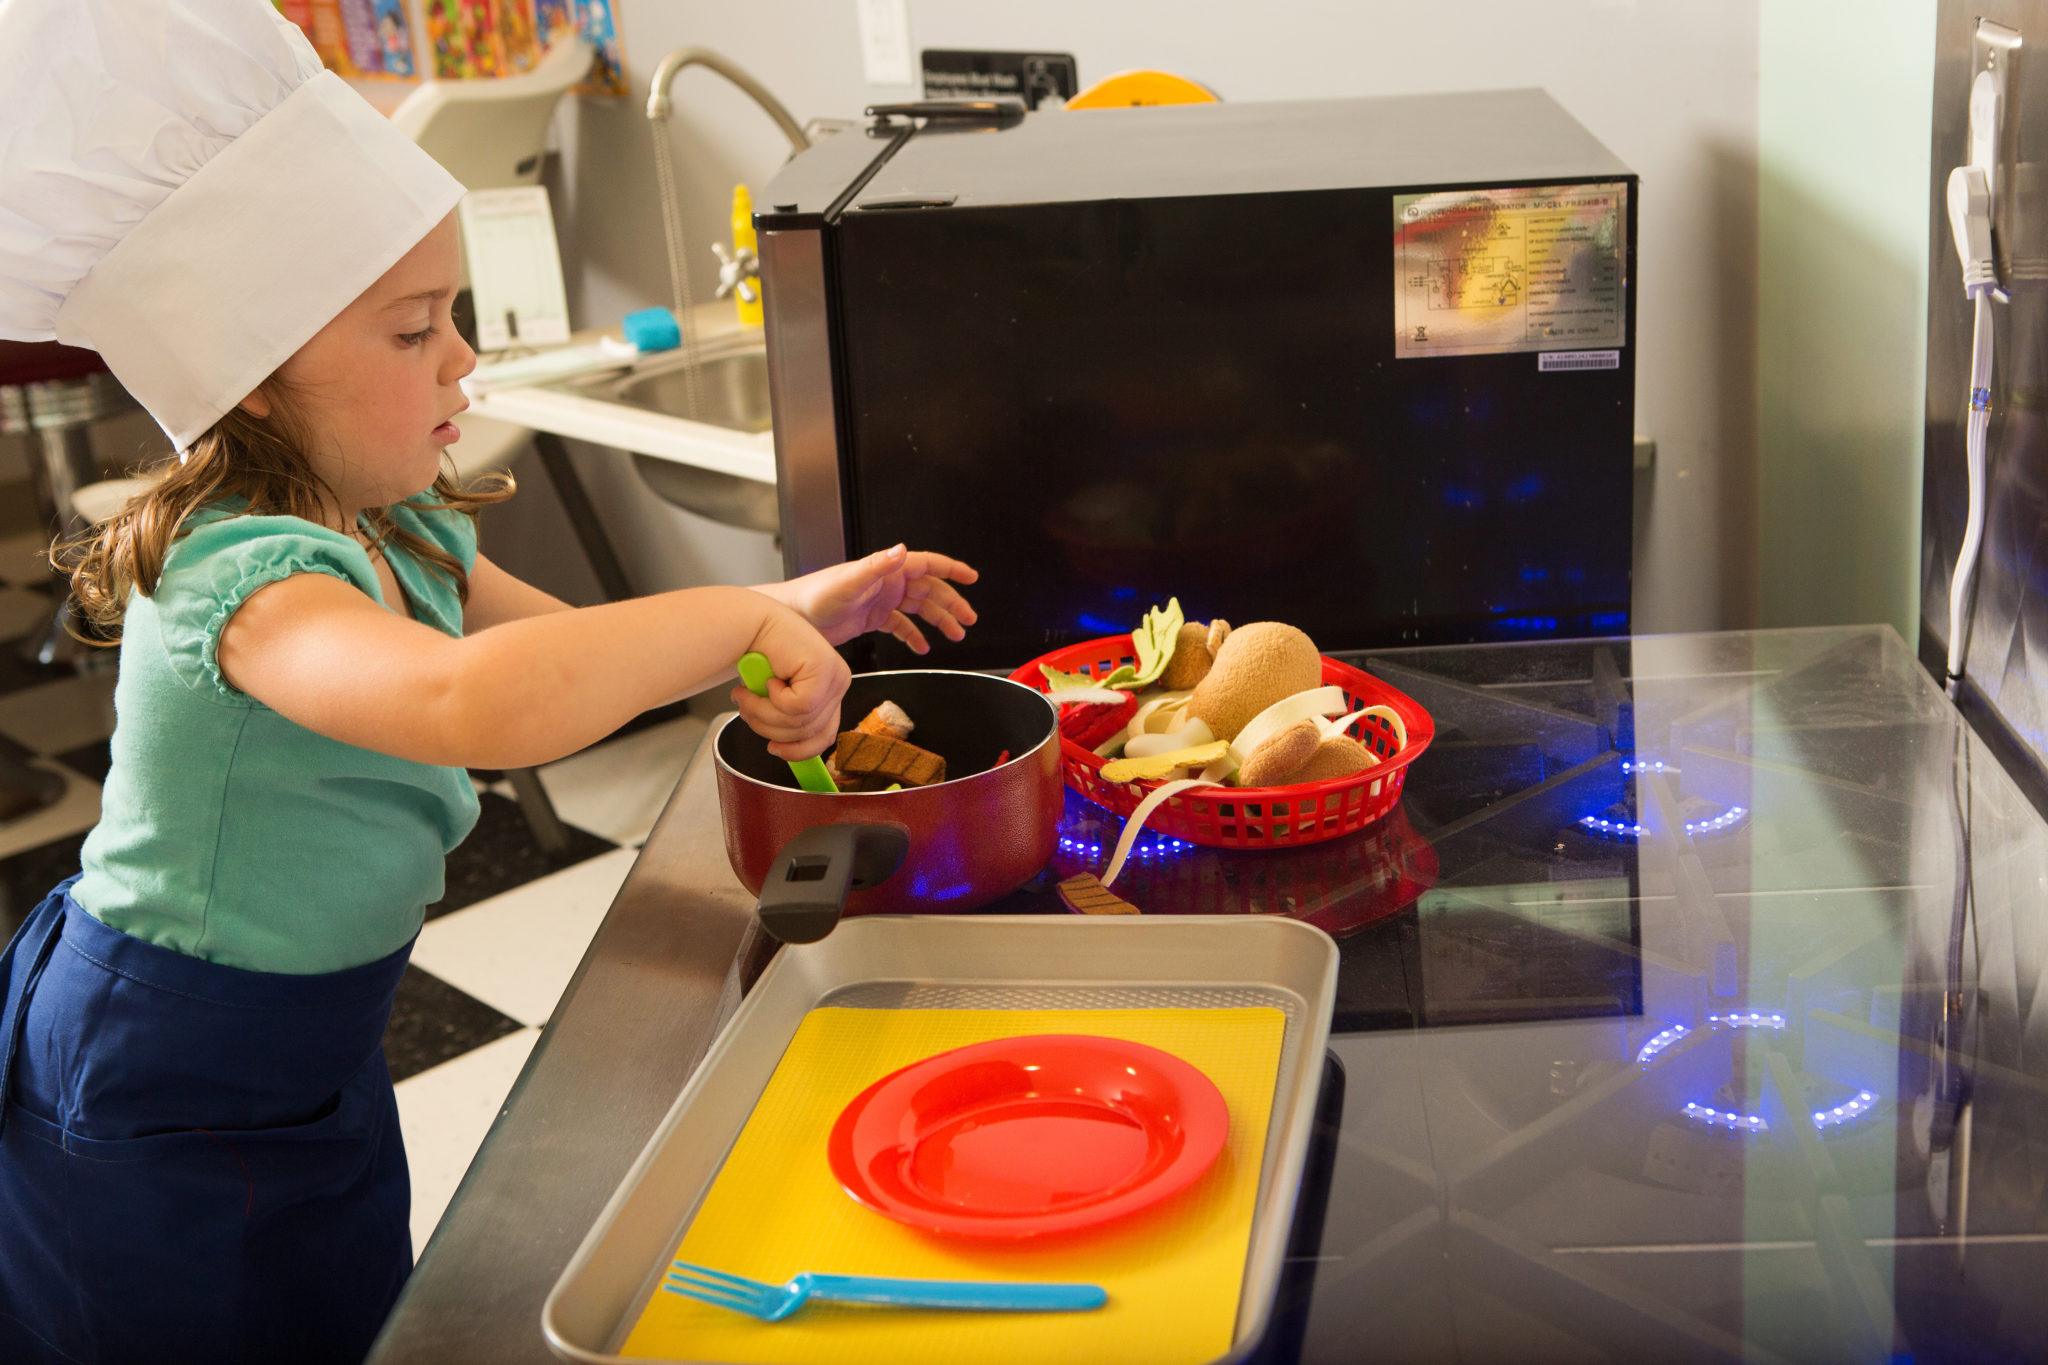 Child playing with Toy Oven